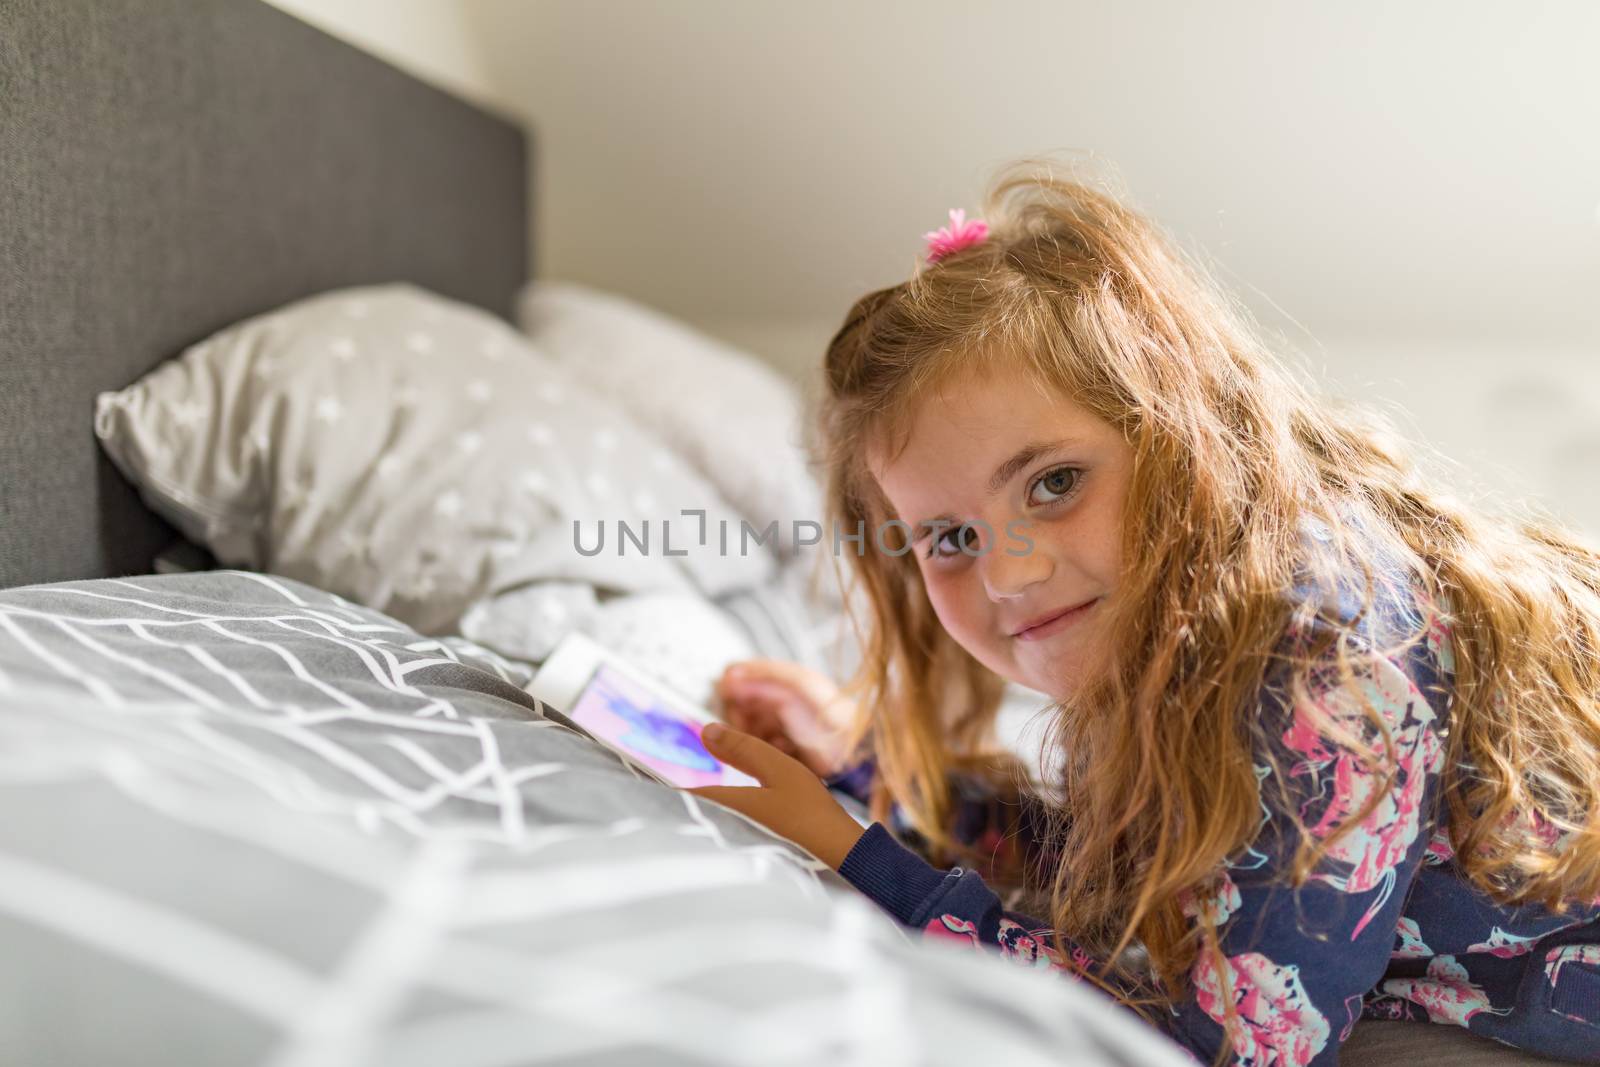 Smiling happy cute girl with long curly golden hair using digital tablet in bed.